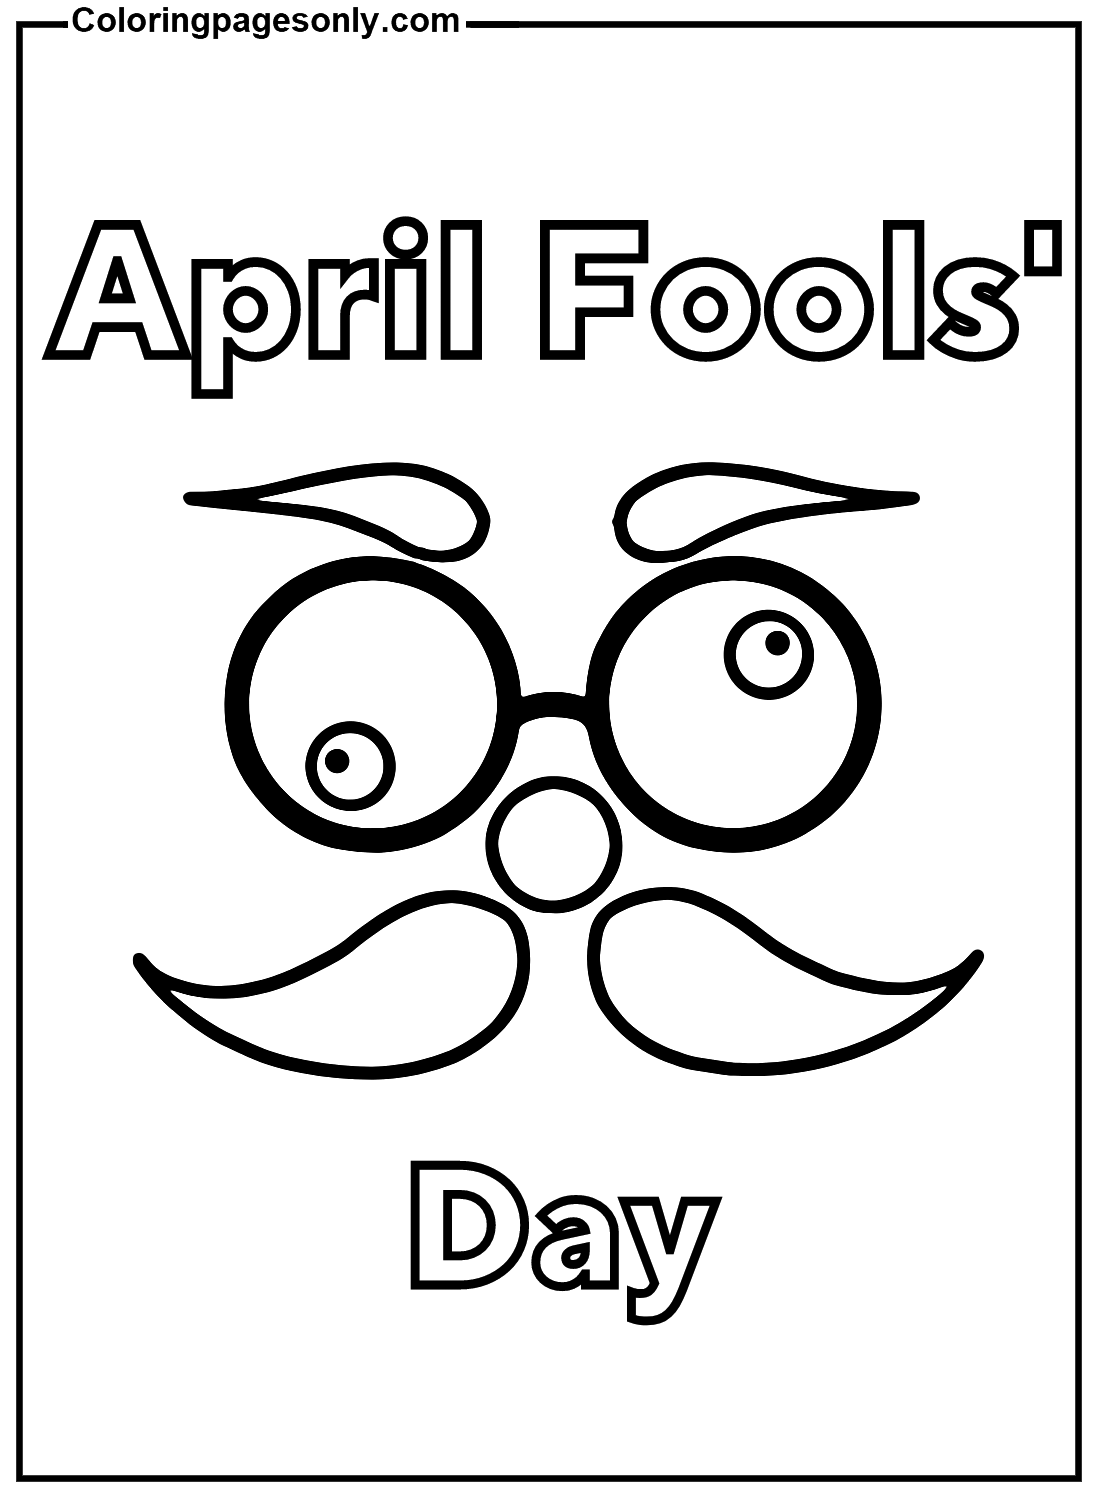 Printable April Fools’ Day from April Fool's Day